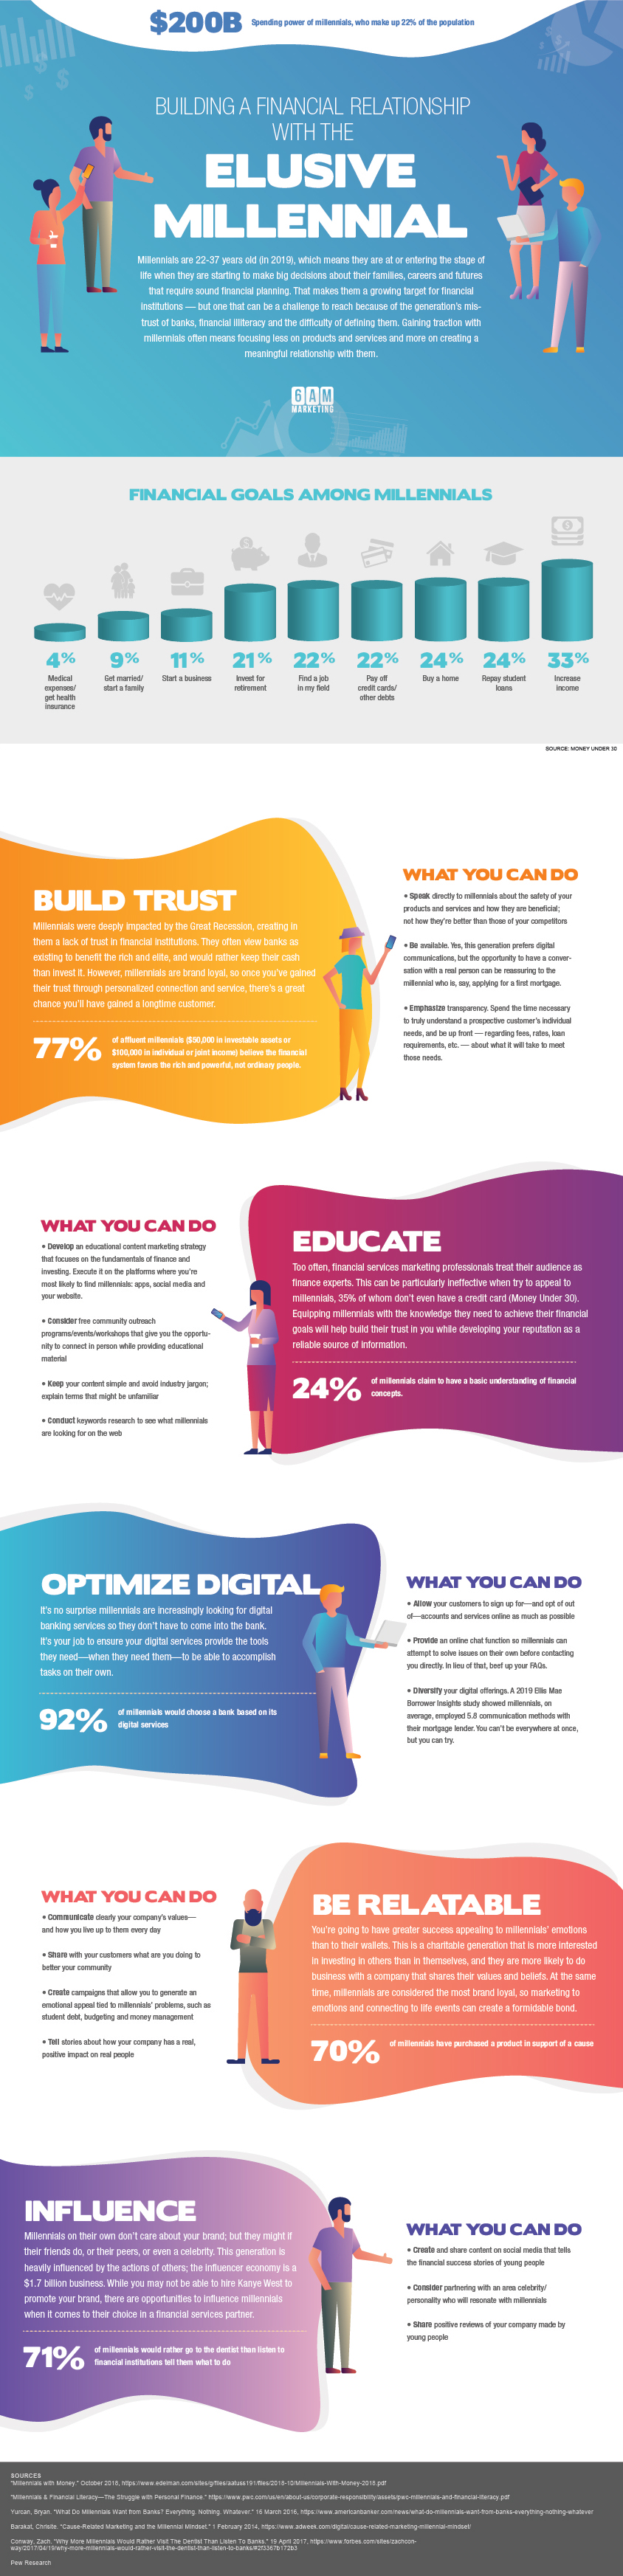 Financial services marketing to millennials infographic